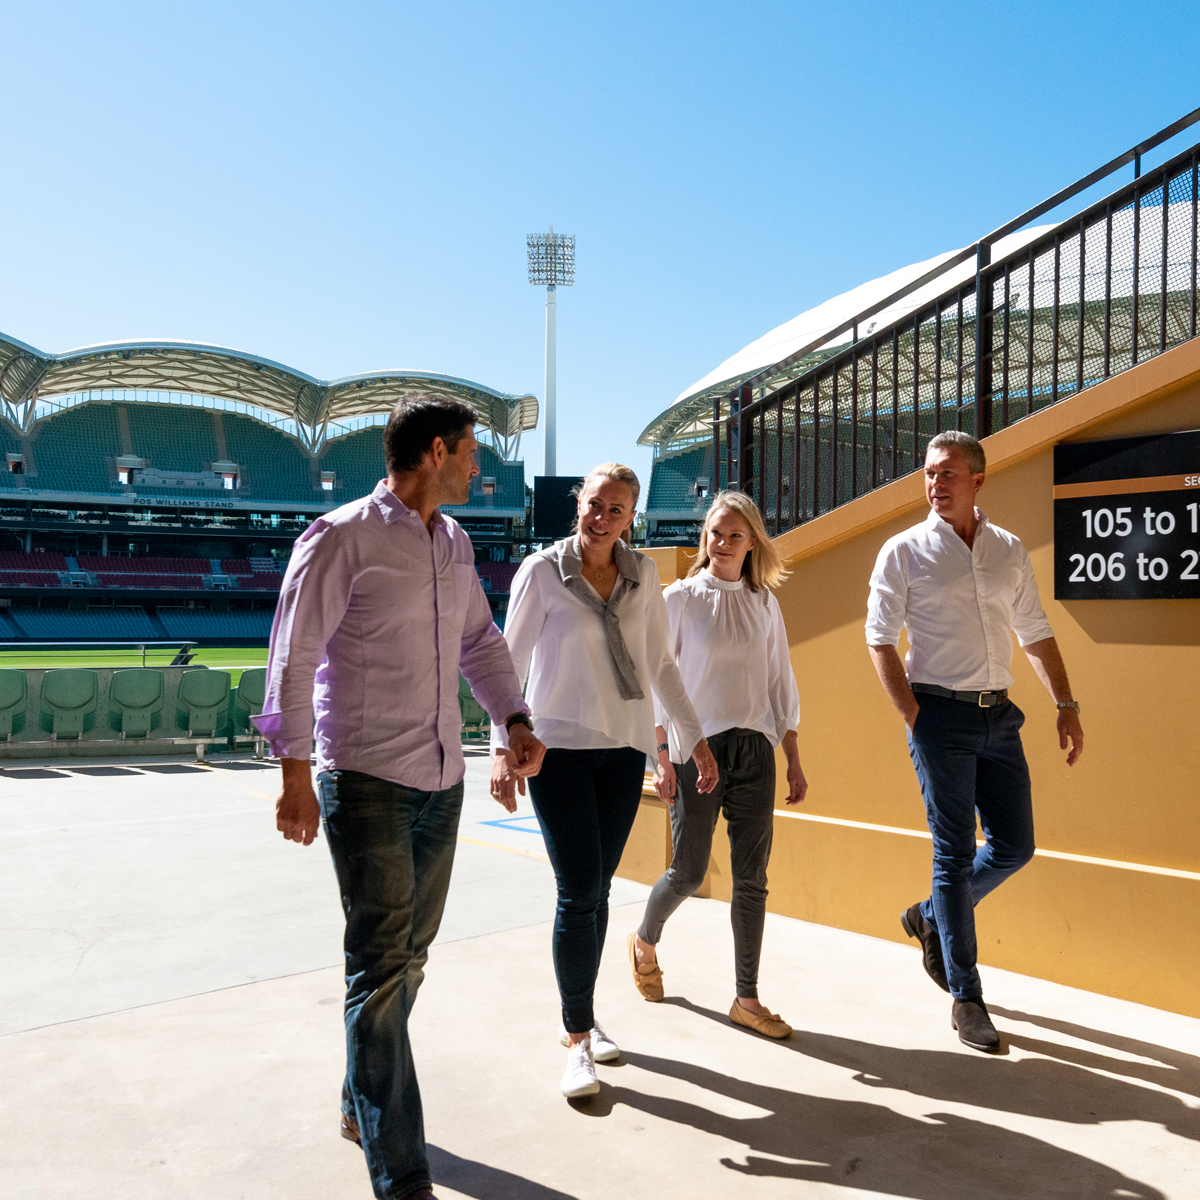 adelaide oval tours phone number